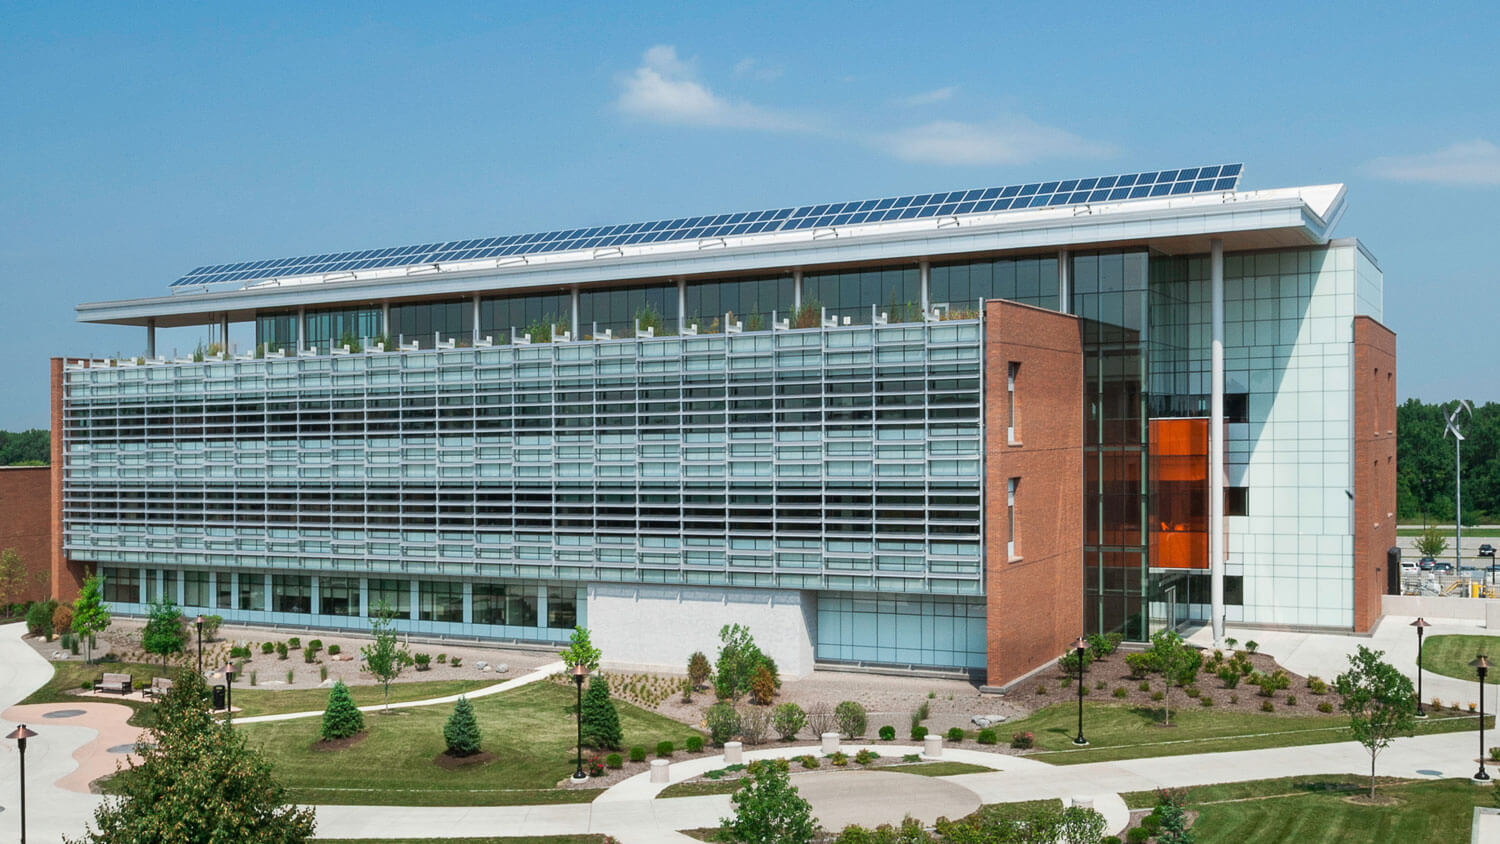 Exterior of Sustainability Hall, showing the solar panels on the roof.